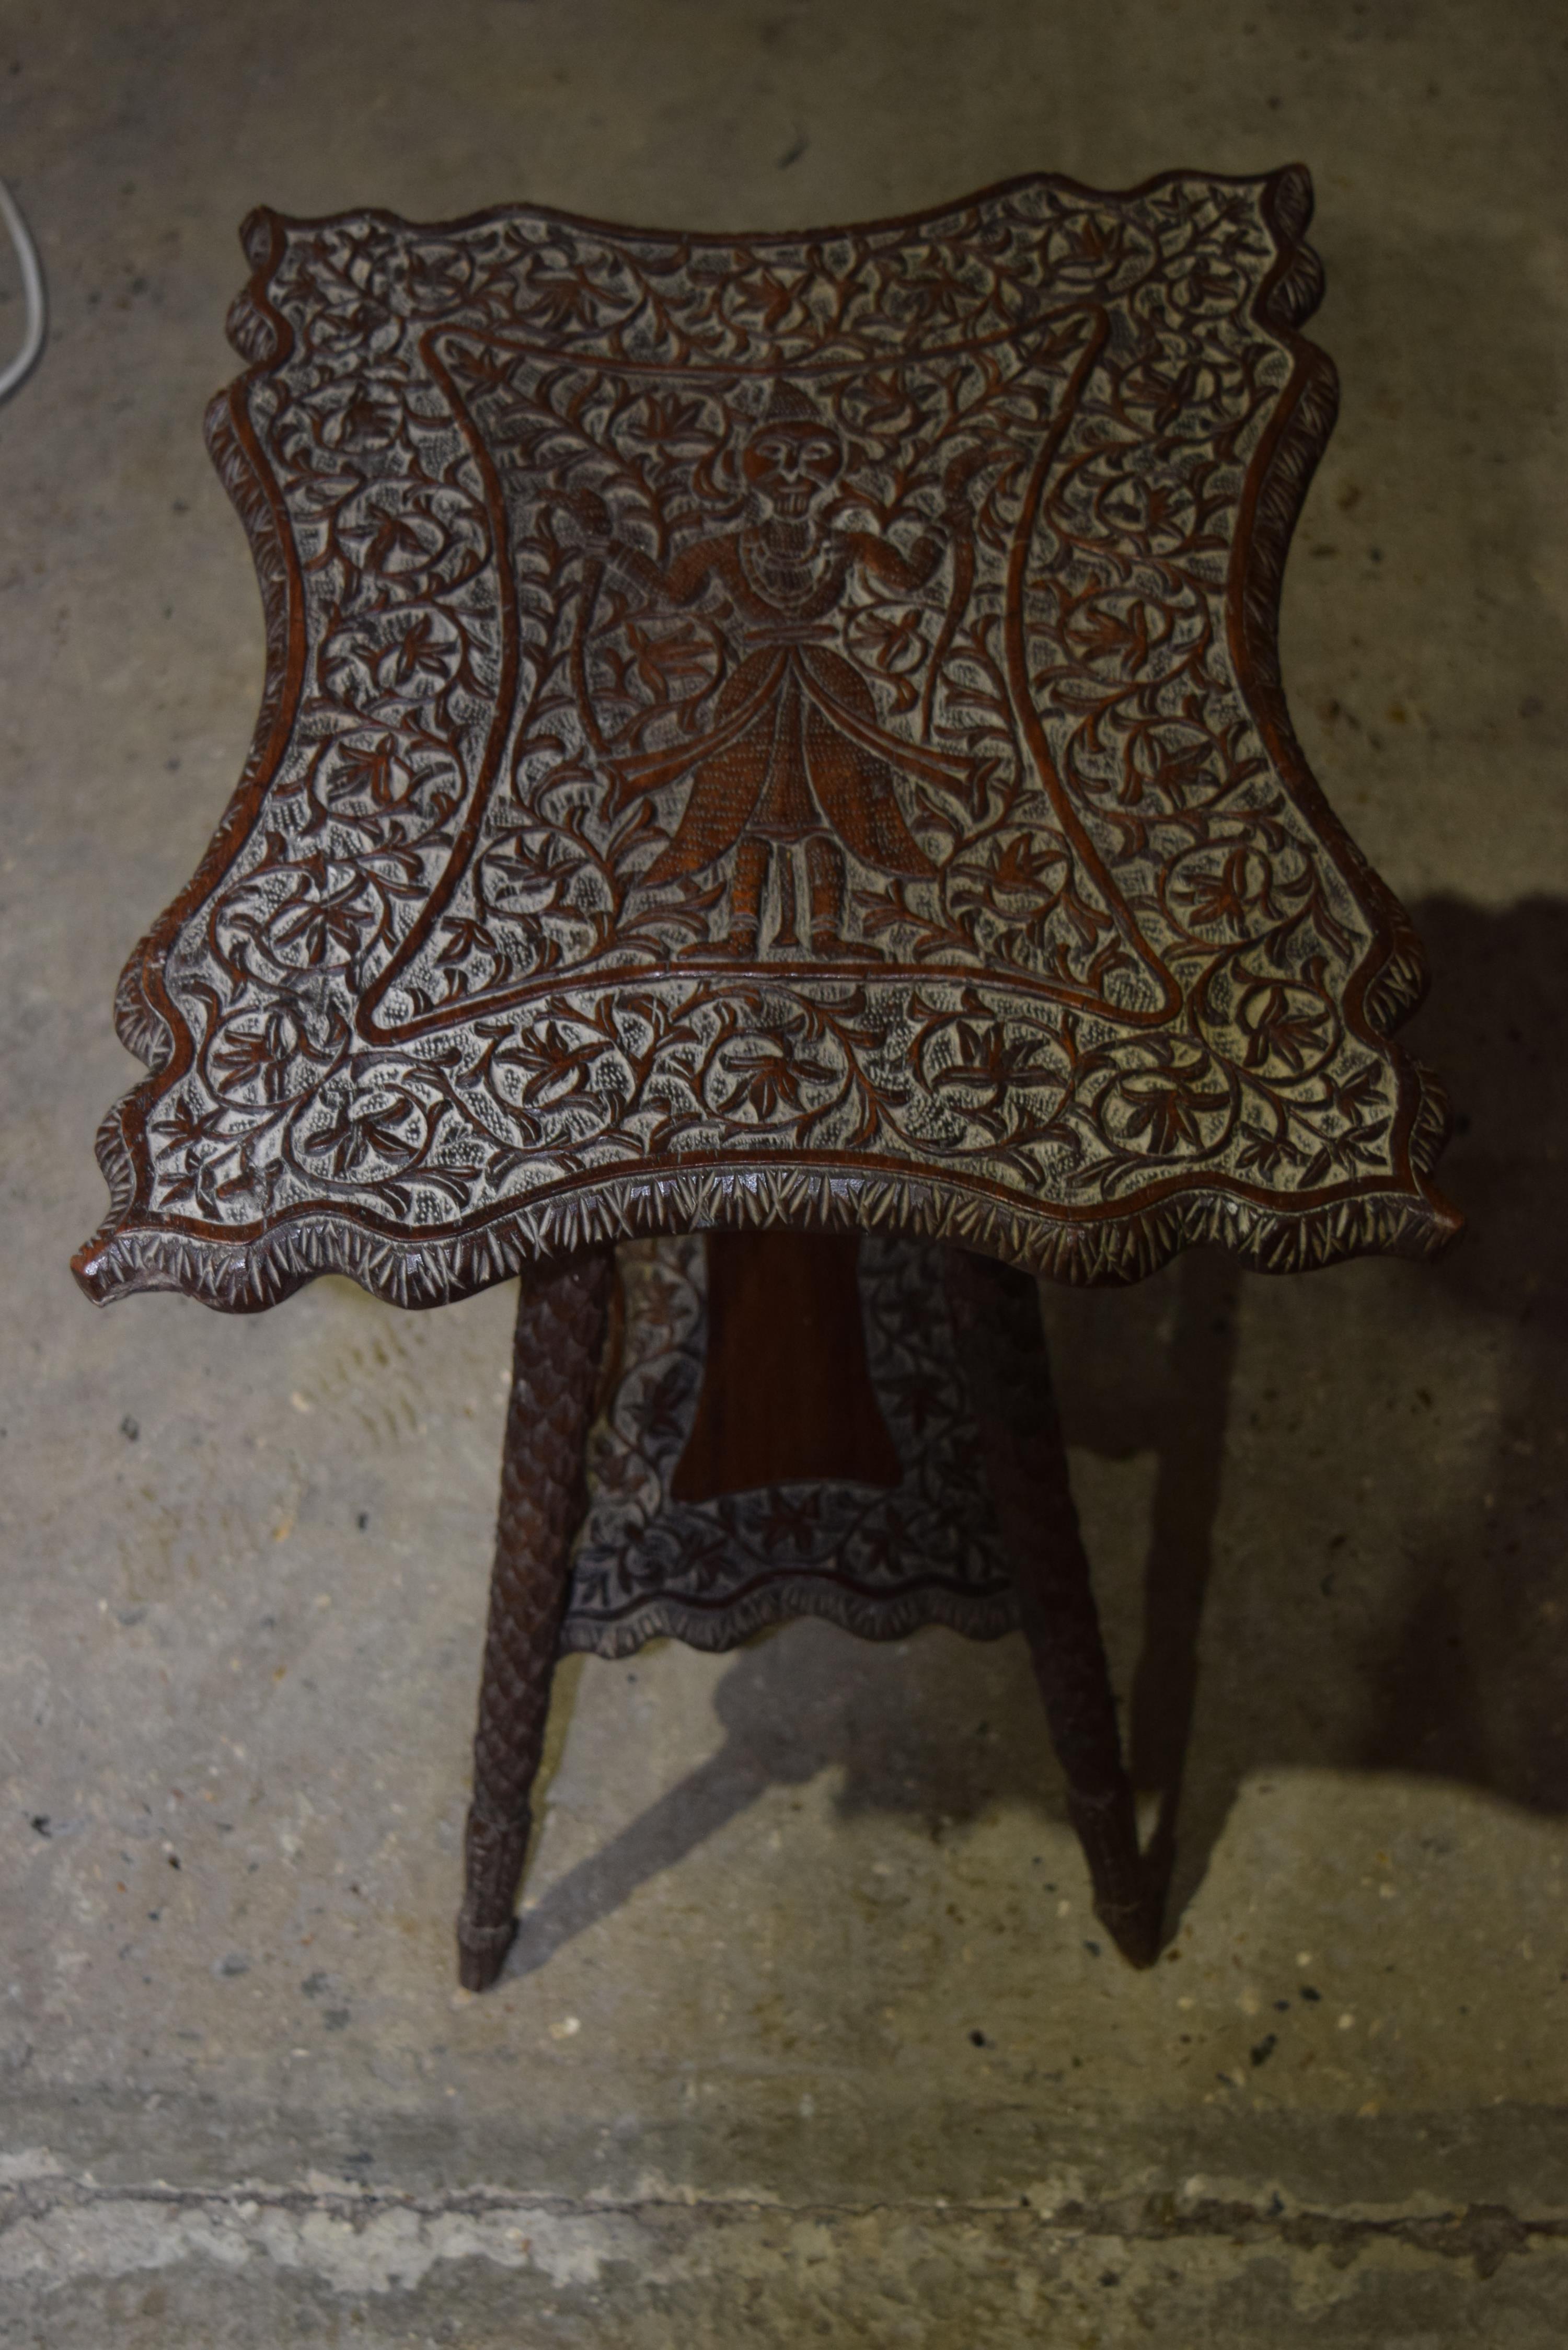 A small Anglo Indian carved wooden table 60 x 48 cm.